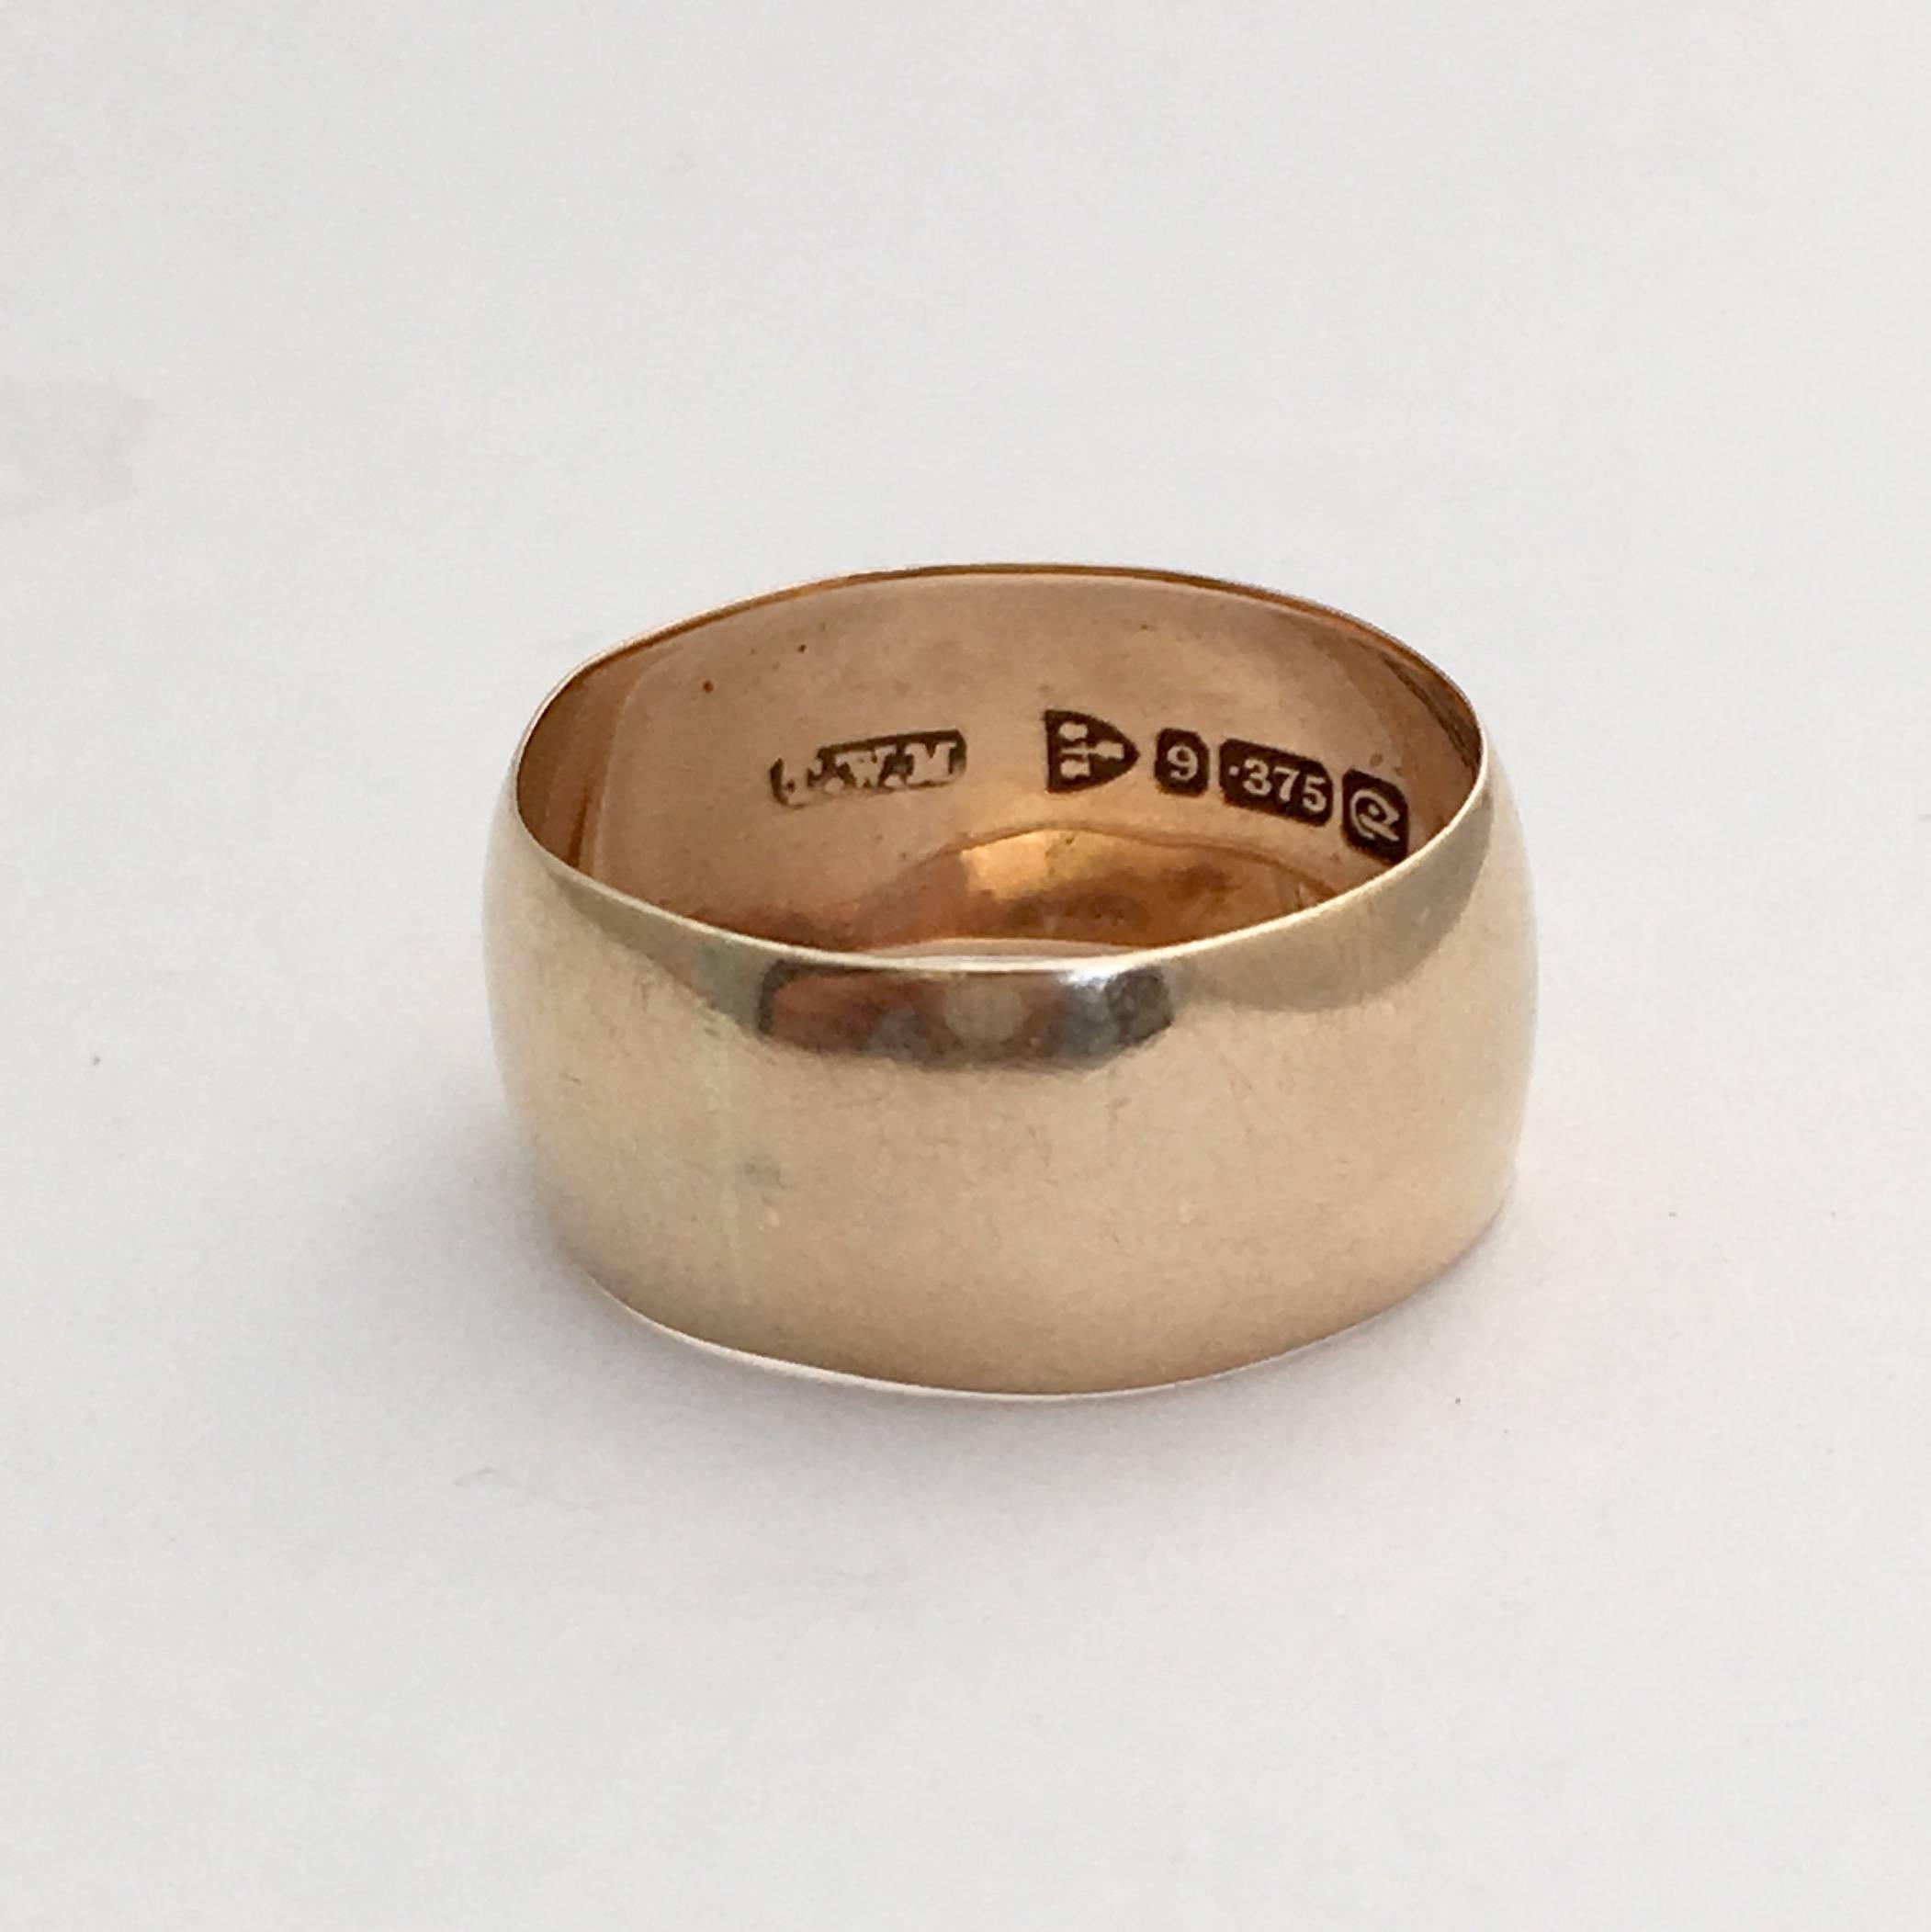 This beautiful deep wedding band dates from the roaring 20s and has been well-loved over the years. It is full of subtle character with its slightly curved design and gorgeous warm rose gold. It looks beautifully stylish worn alone, but also makes a